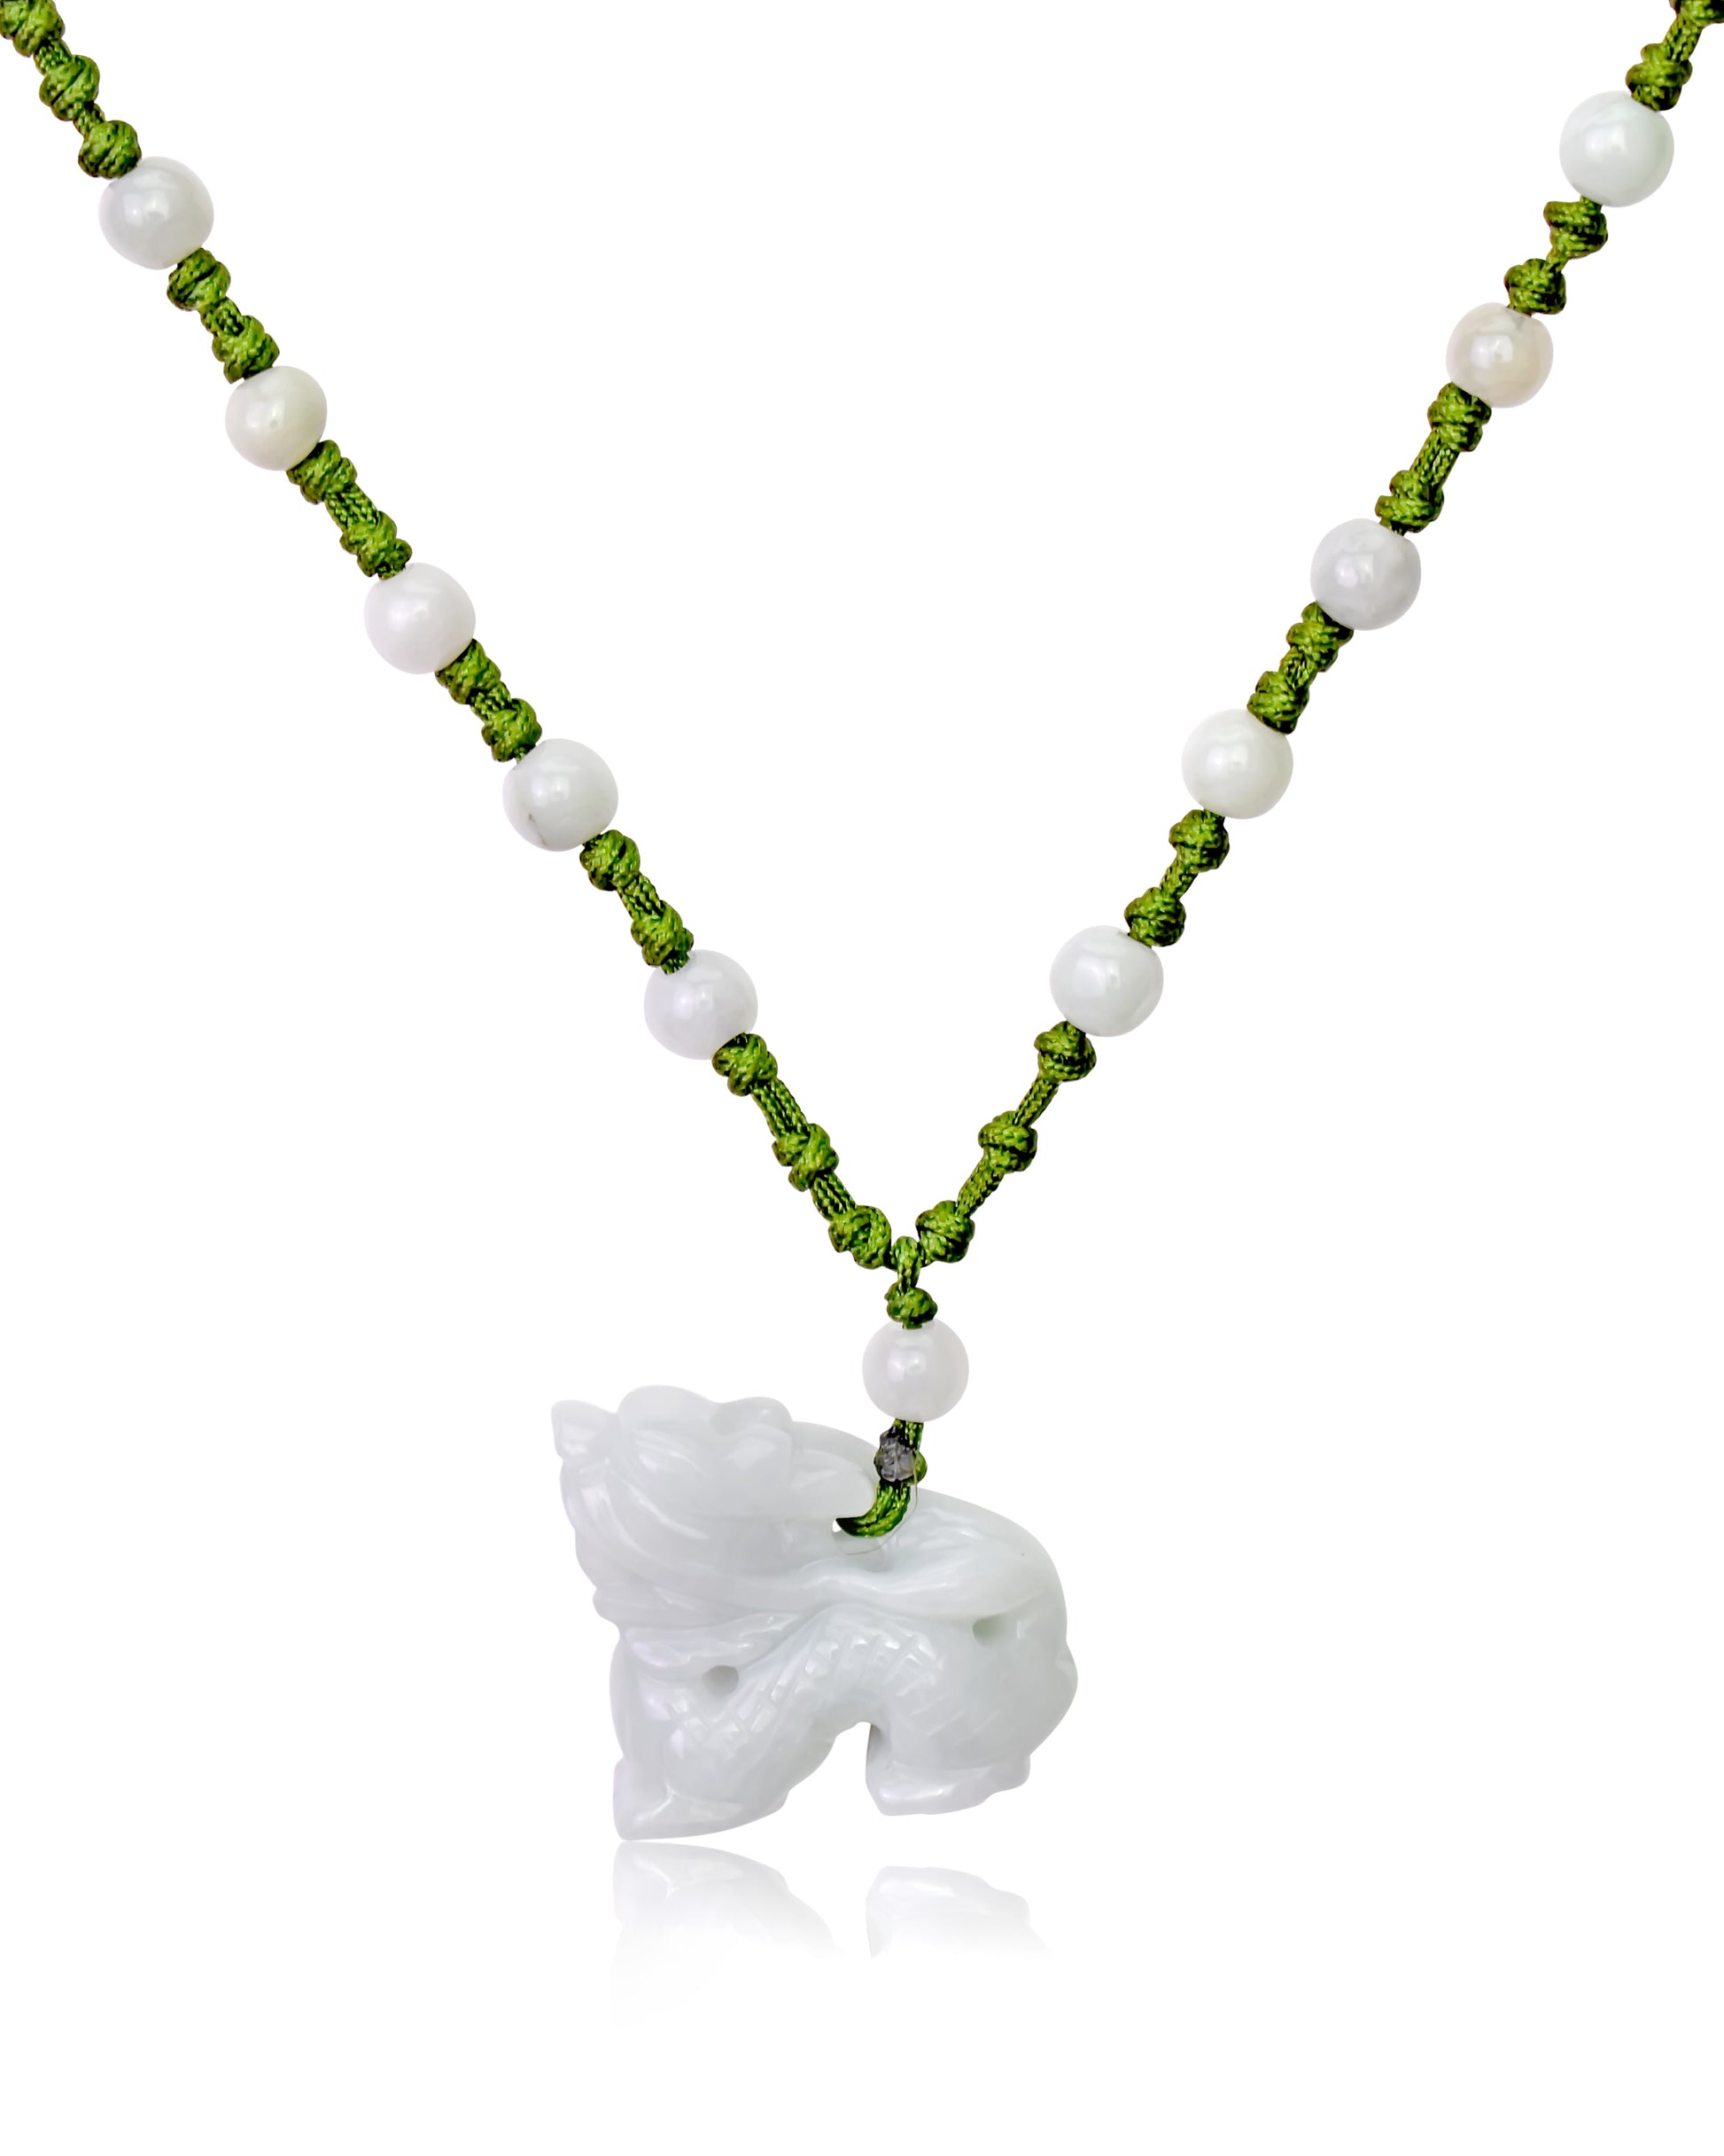 Show off Your Charismatic Dragon Style with a Zodiac Jade Necklace